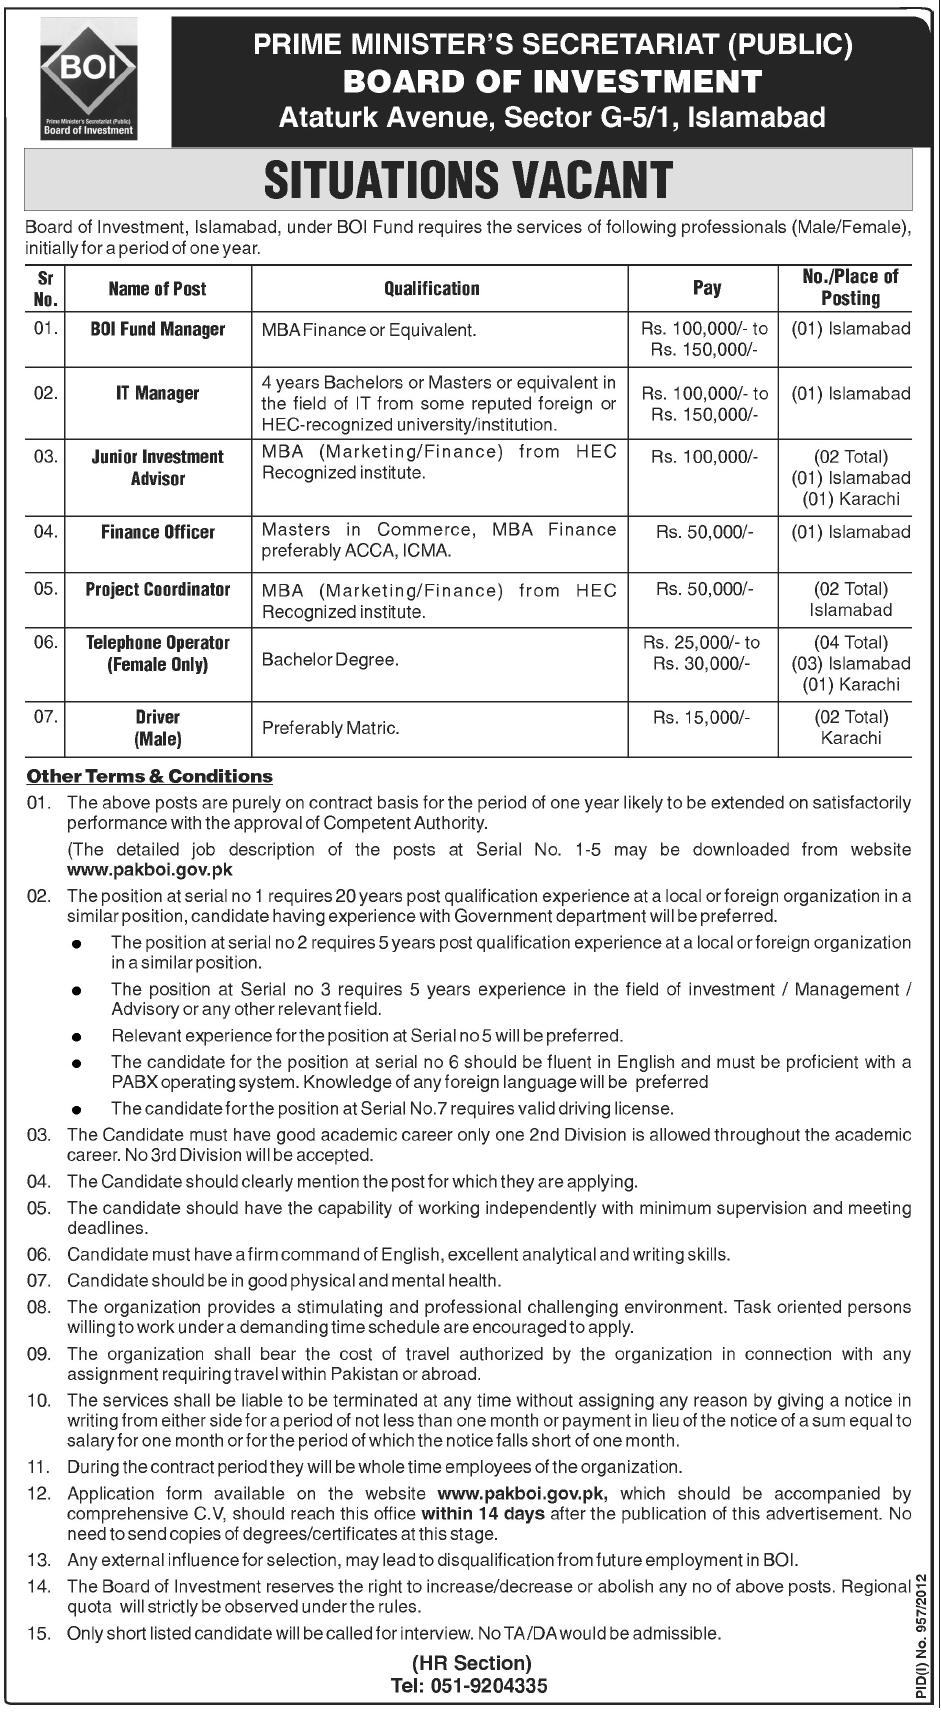 Board of Investment Islamabad (BOI) Prime Minister's Secretariat Jobs (Government Jobs)